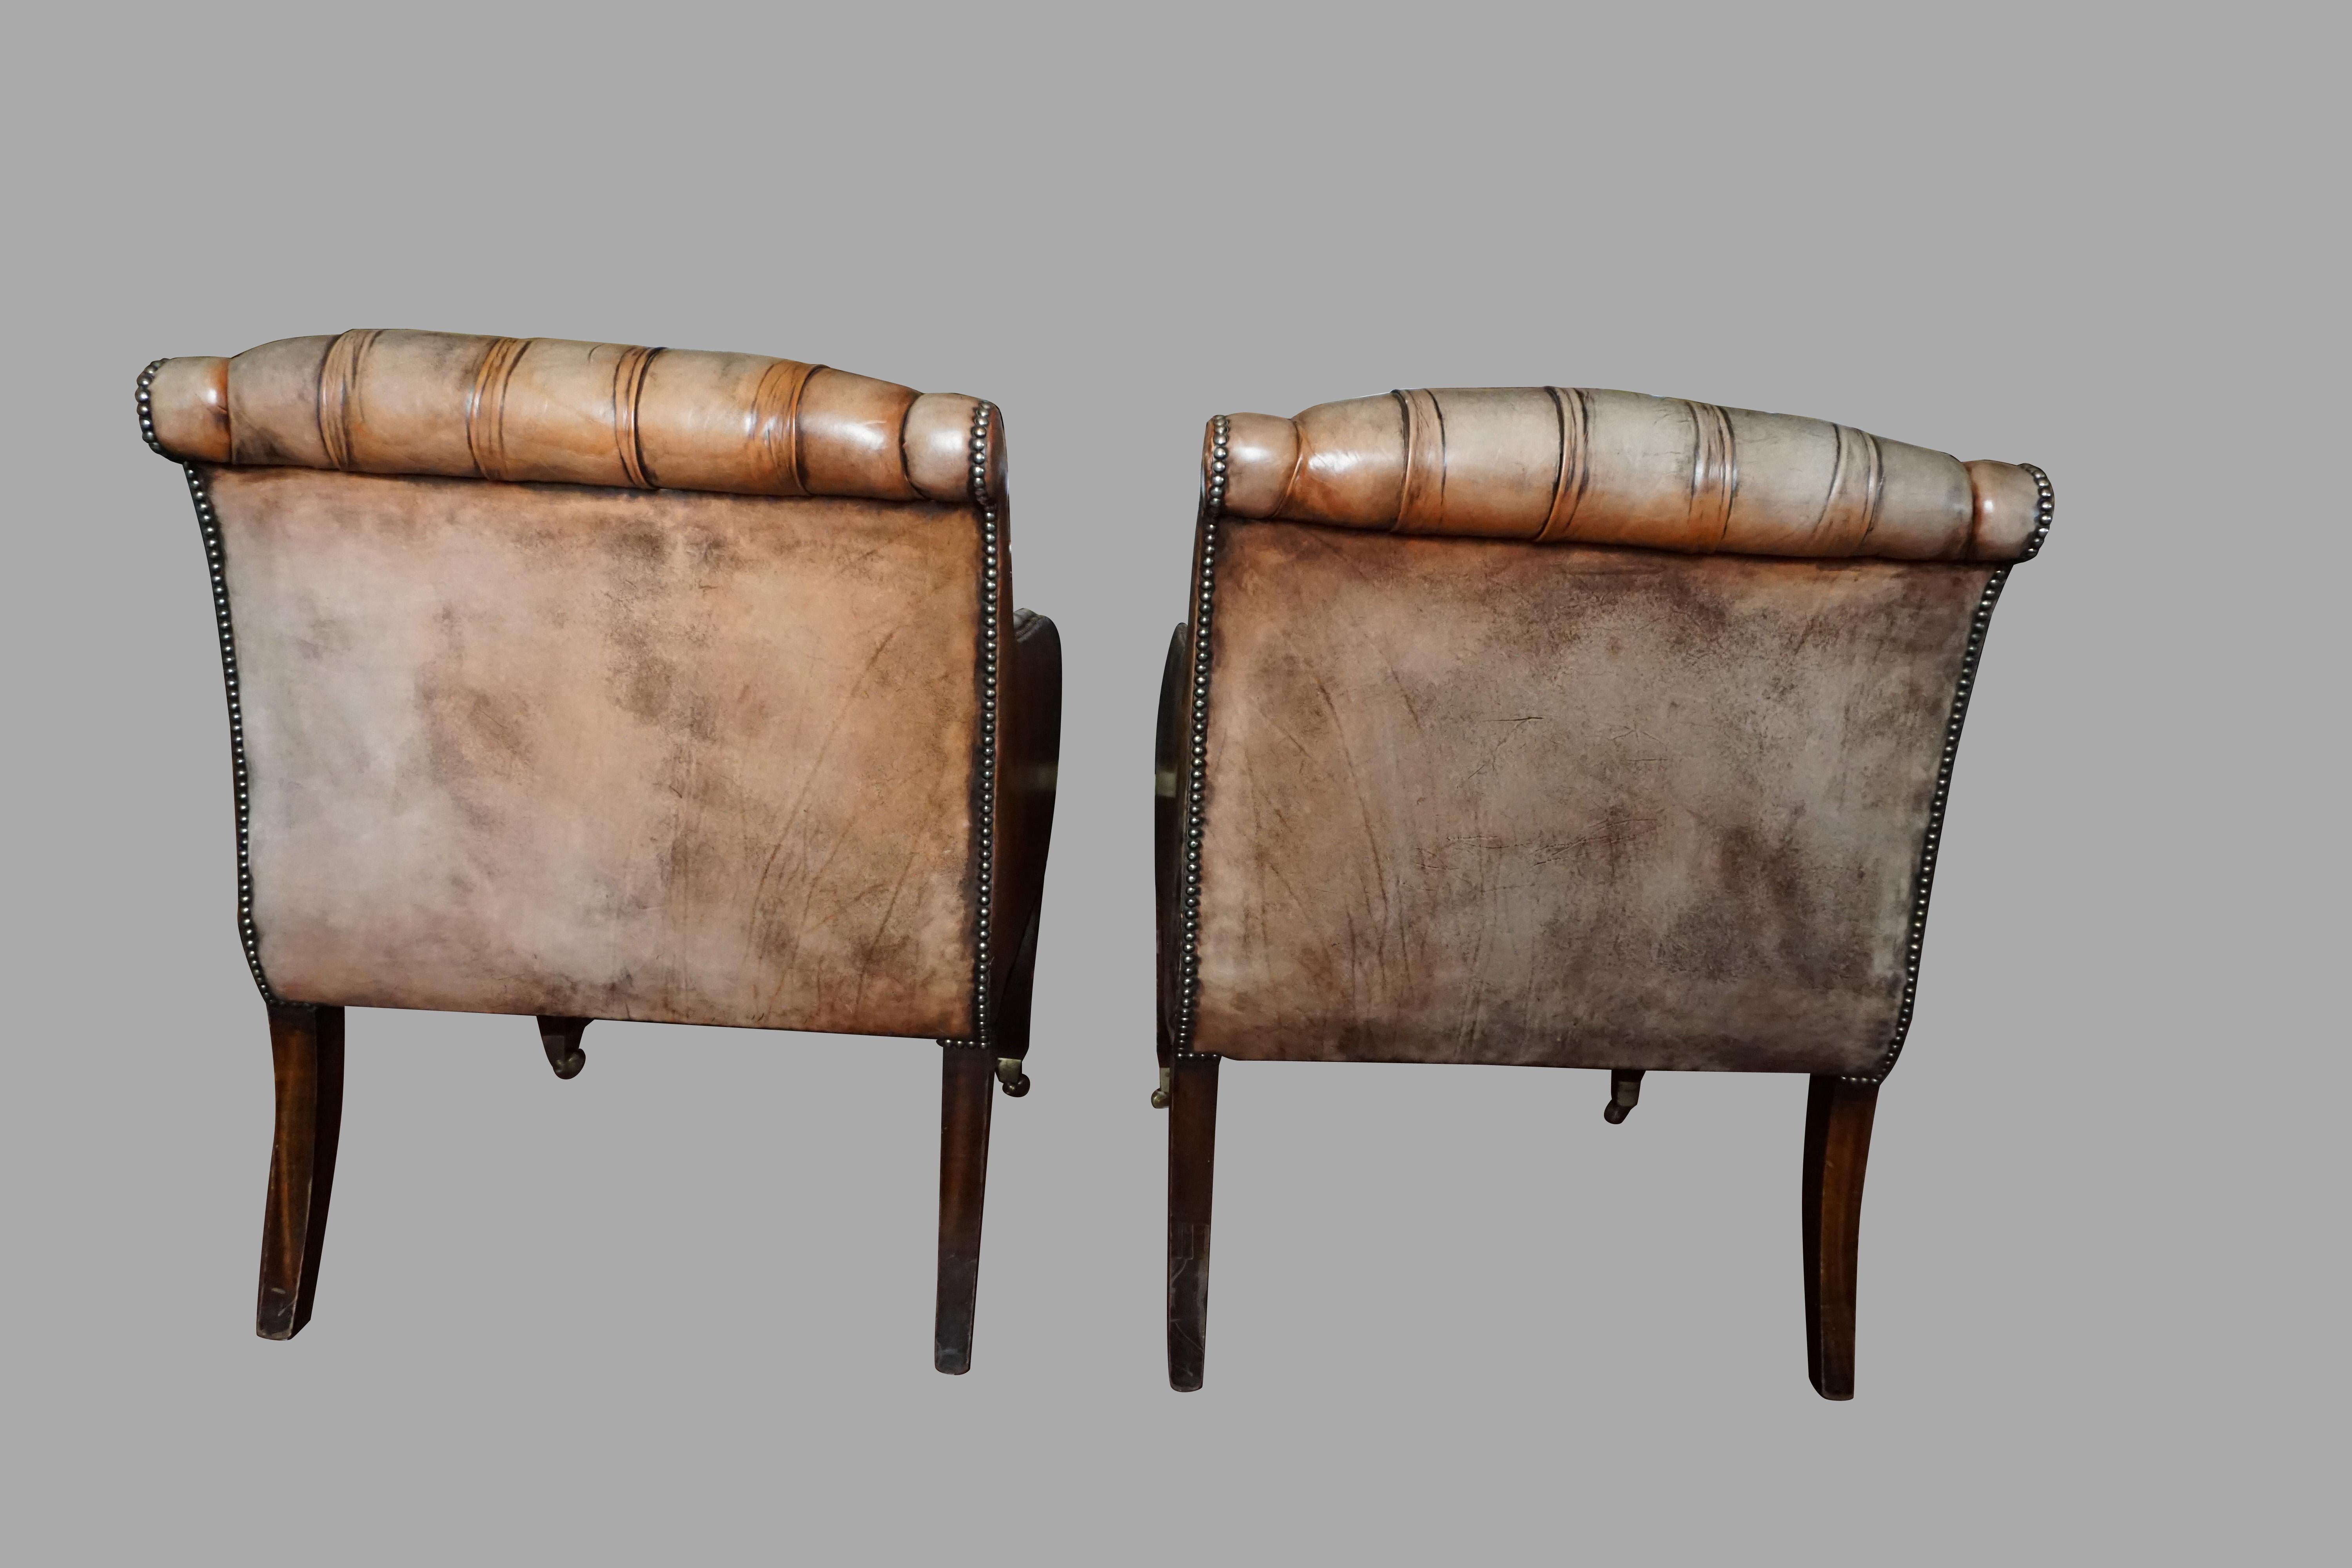 Late 20th Century Pair of Regency Style Tufted Leather Club Chairs with Mahogany Legs